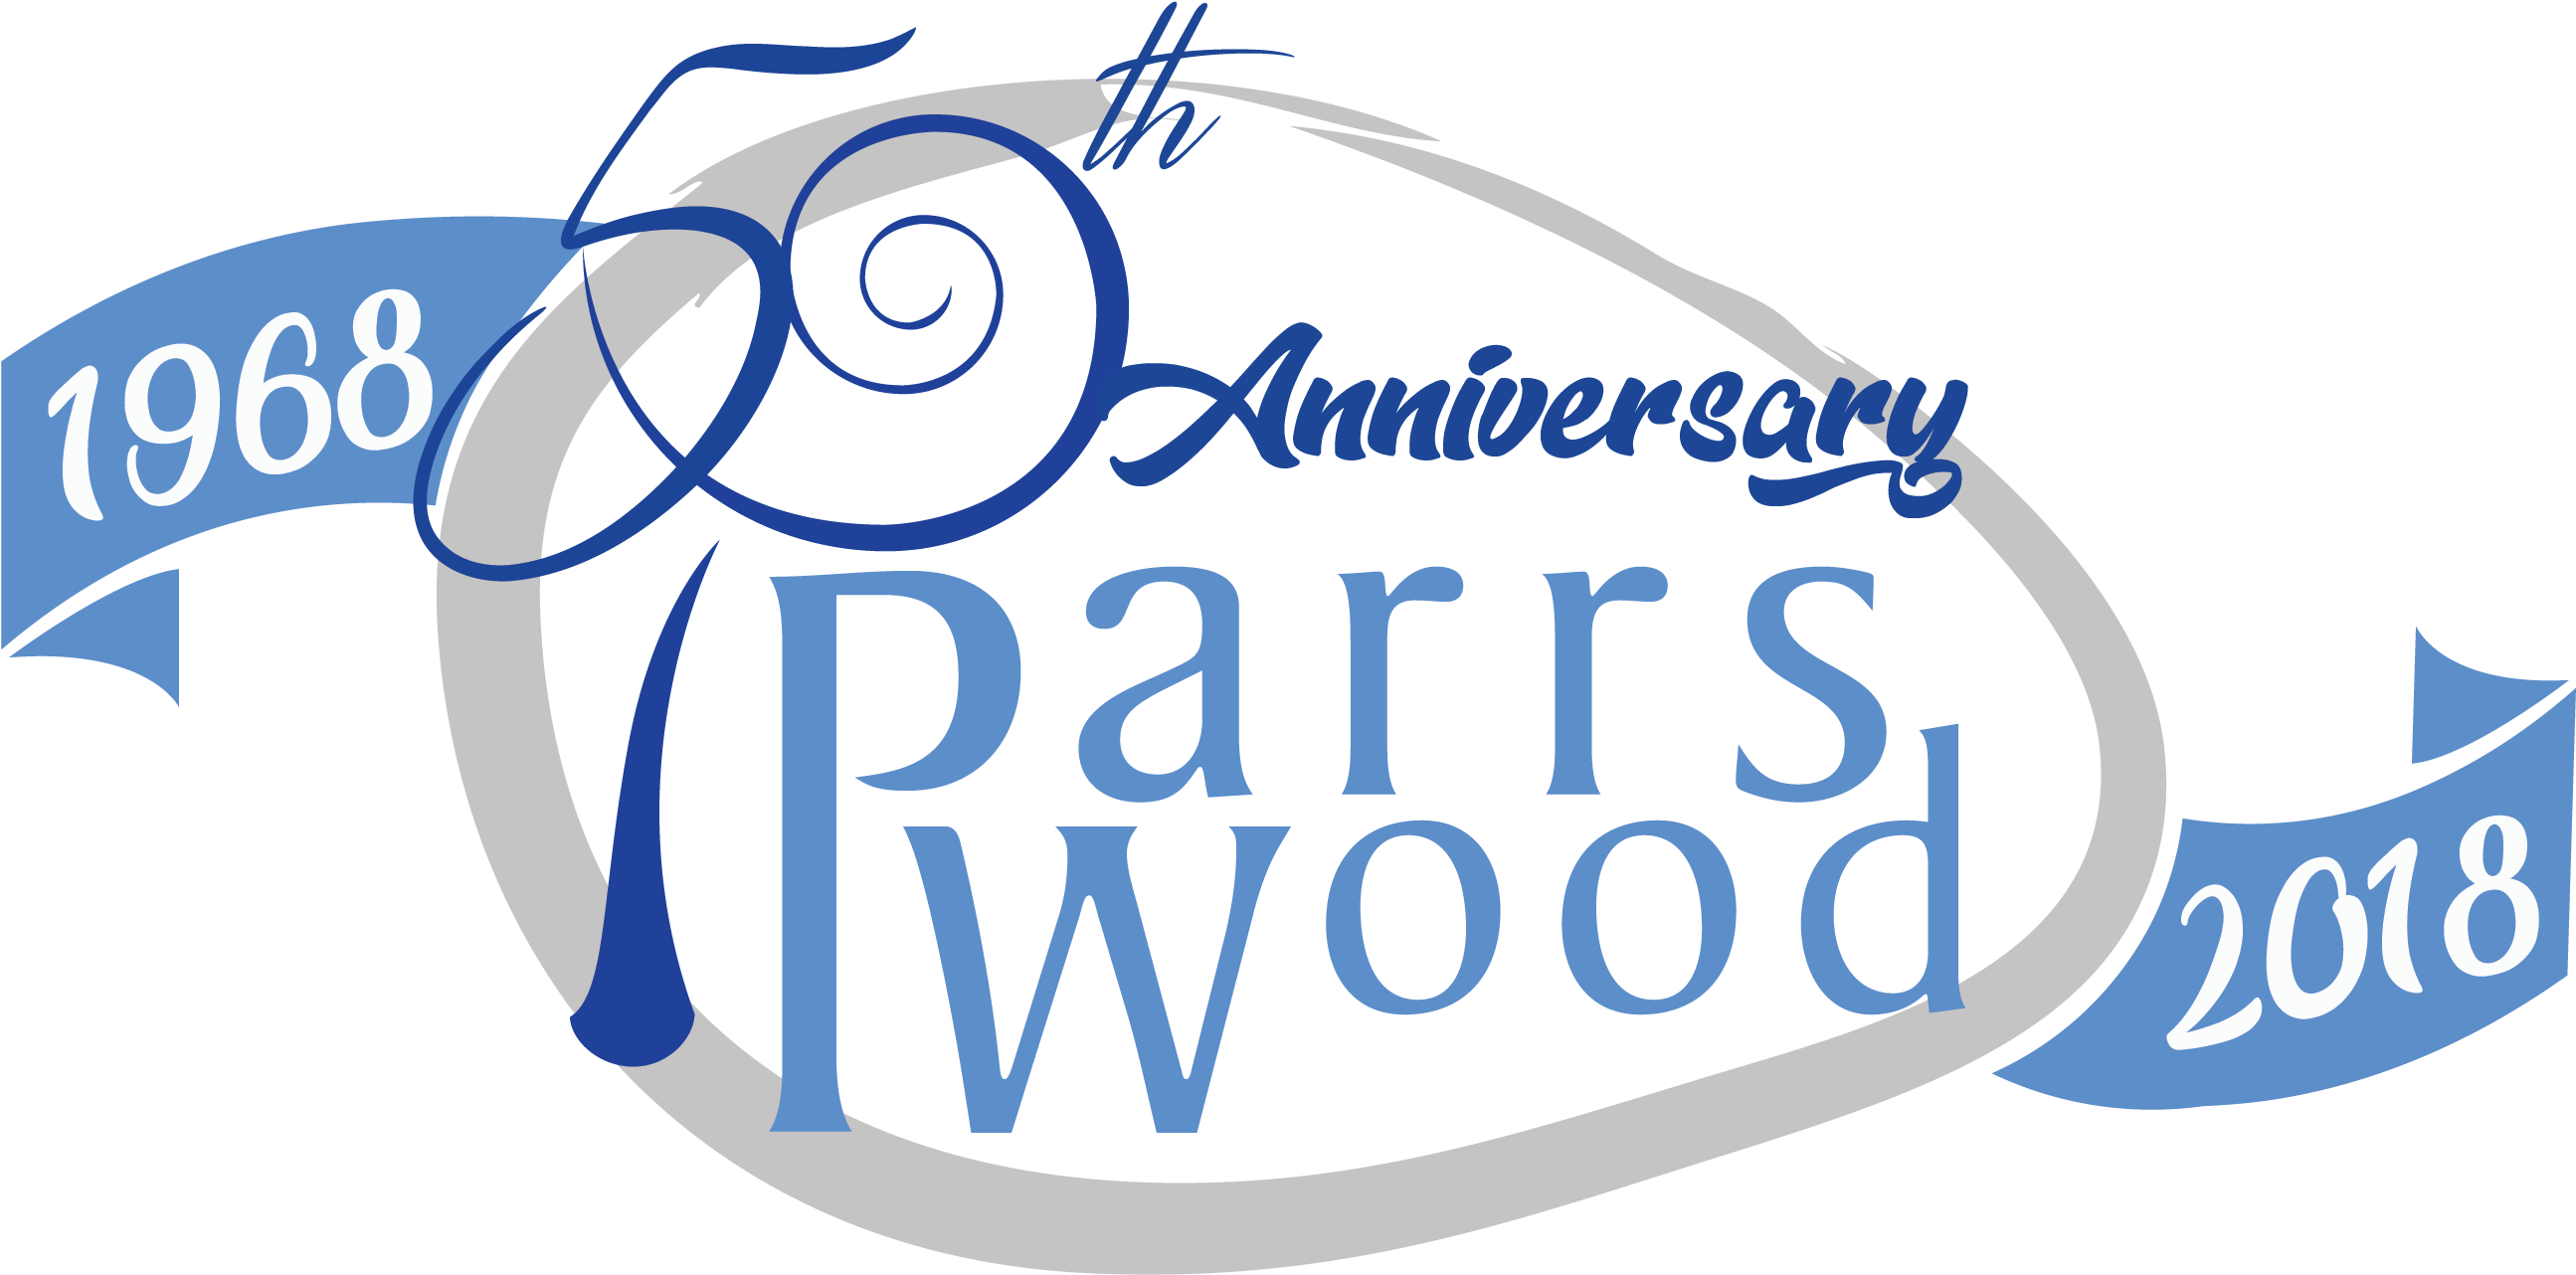 We Are Celebrating Our Golden Anniversary Parrs Wood - Parrs Wood High School (2635x1326)